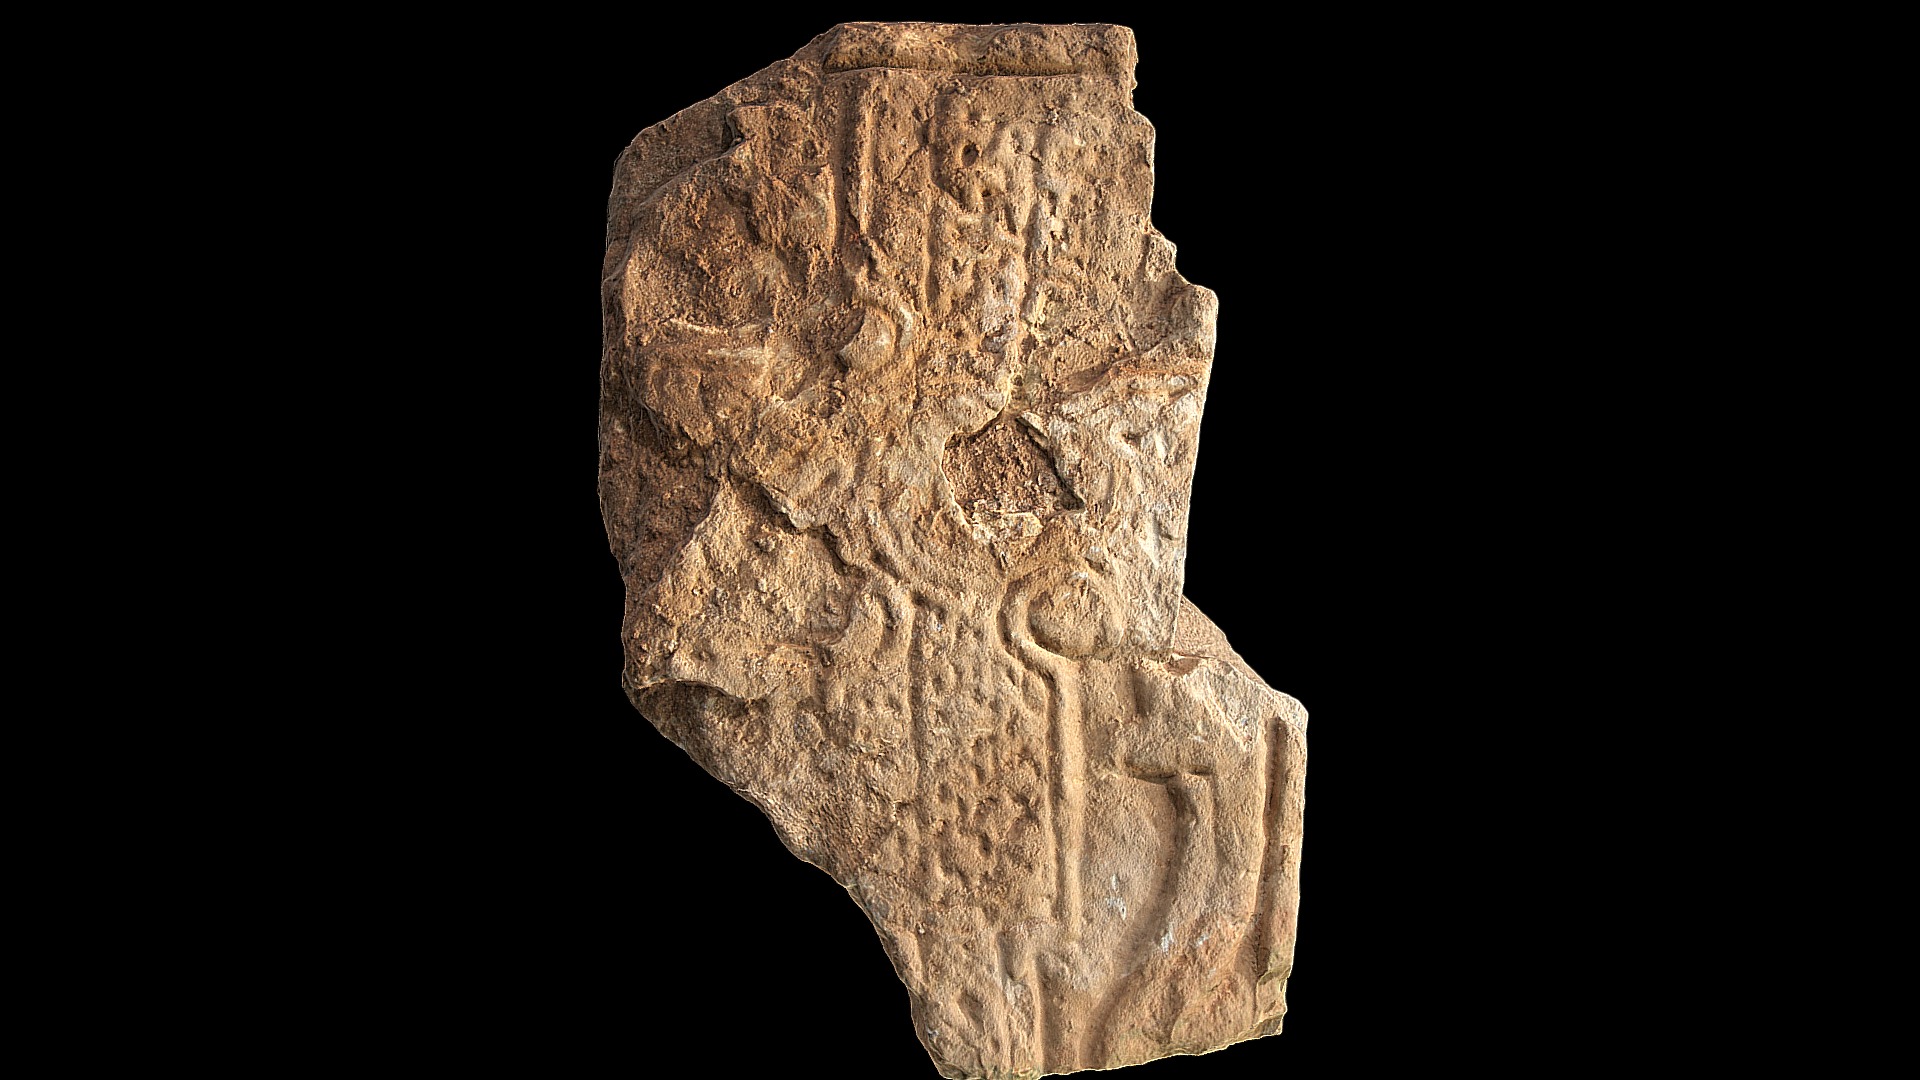 3D model Pictish Cross Slab, Newark Bay, Deerness, Orkney - This is a 3D model of the Pictish Cross Slab, Newark Bay, Deerness, Orkney. The 3D model is about a stone with a carving on it.